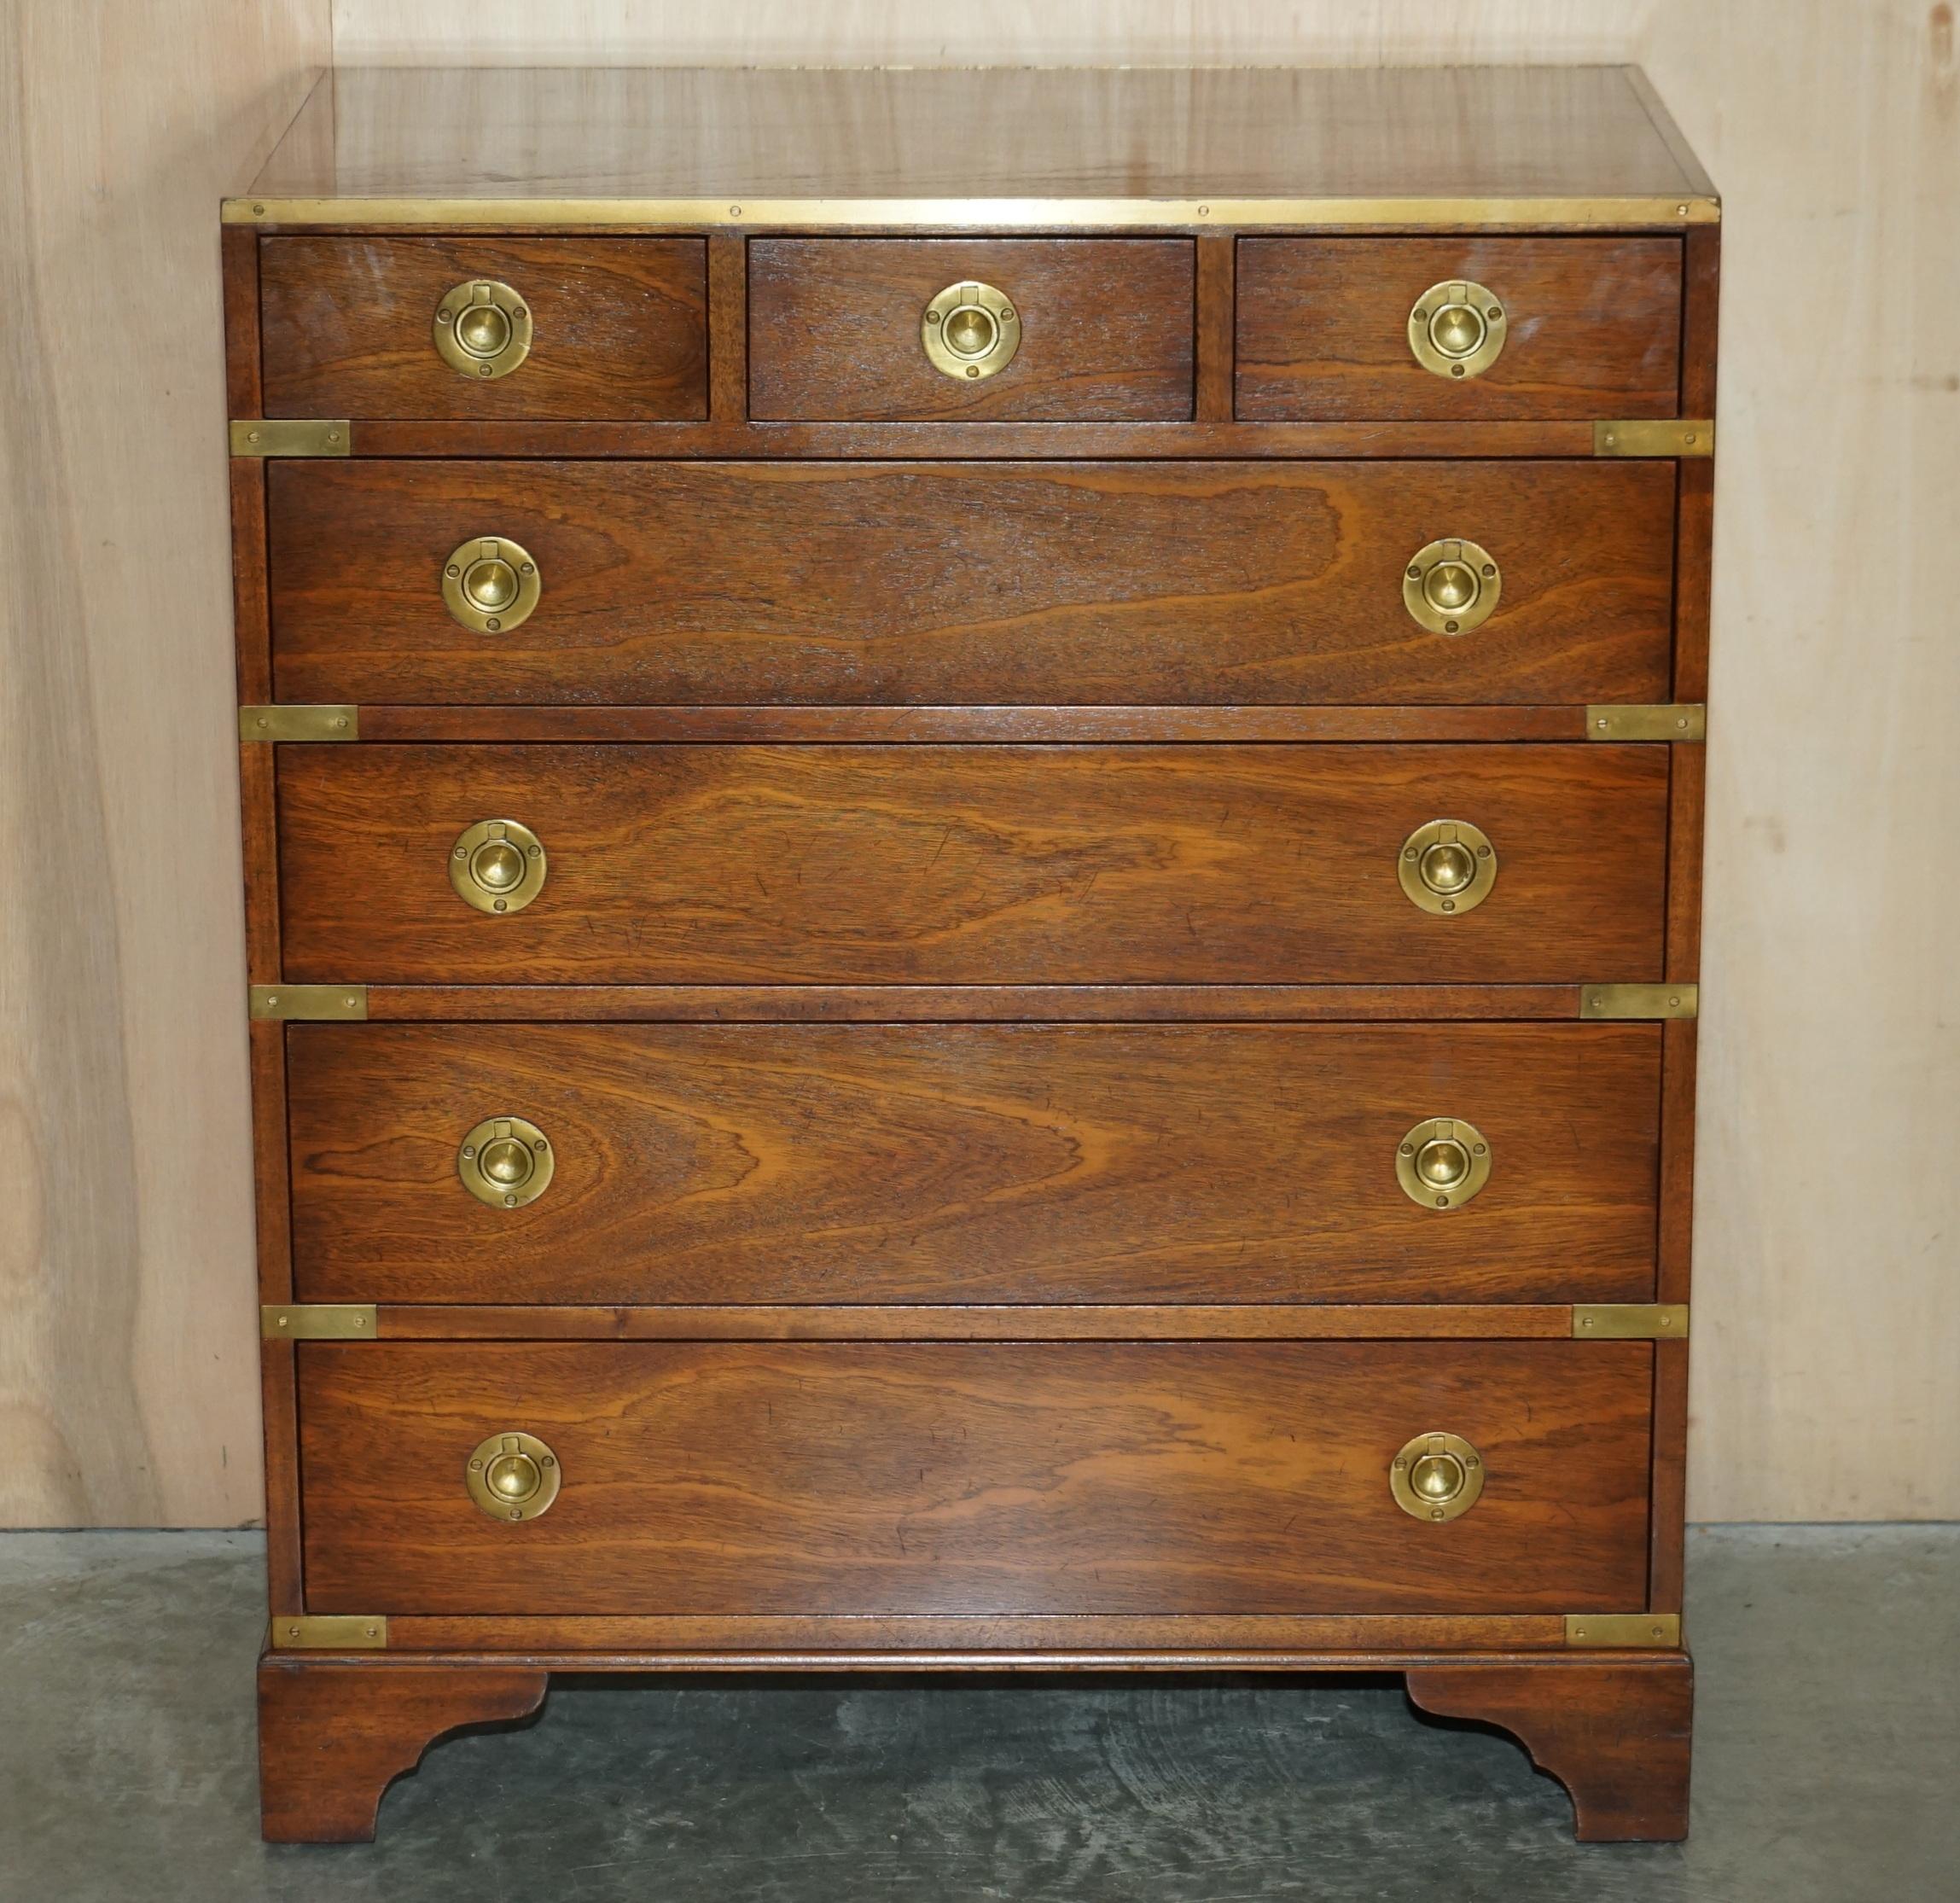 We are delighted to offer for sale this sublime large Harrods Kennedy Military Campaign chest of drawers

A truly stunning and well made piece by Kennedy Furniture and retailed through Harrods London, this a full sized chest of drawers, not a side